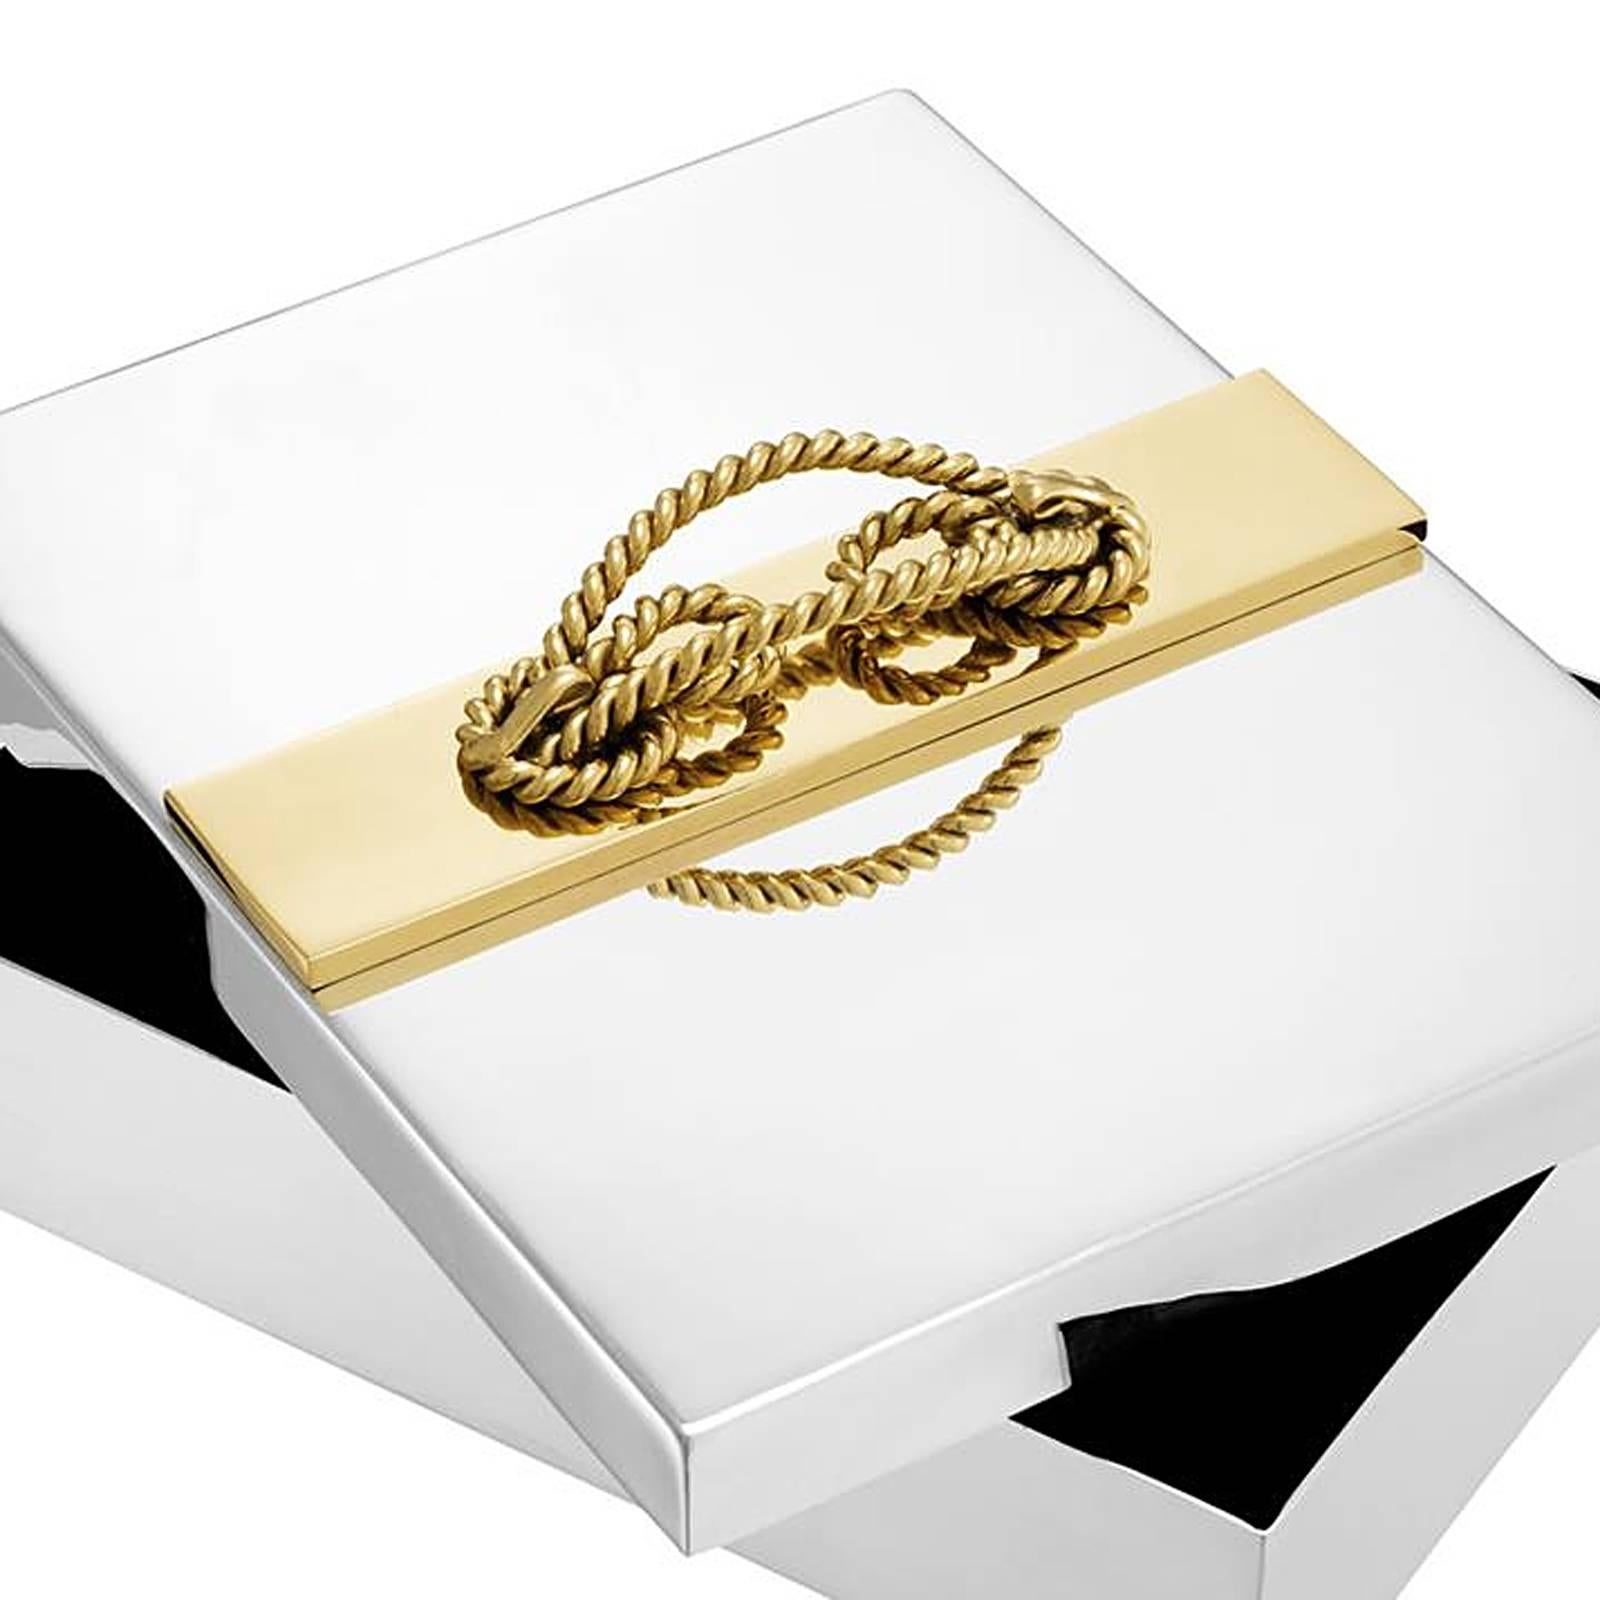 Polished Gold Knot Jewelry Box in Nickel Finish